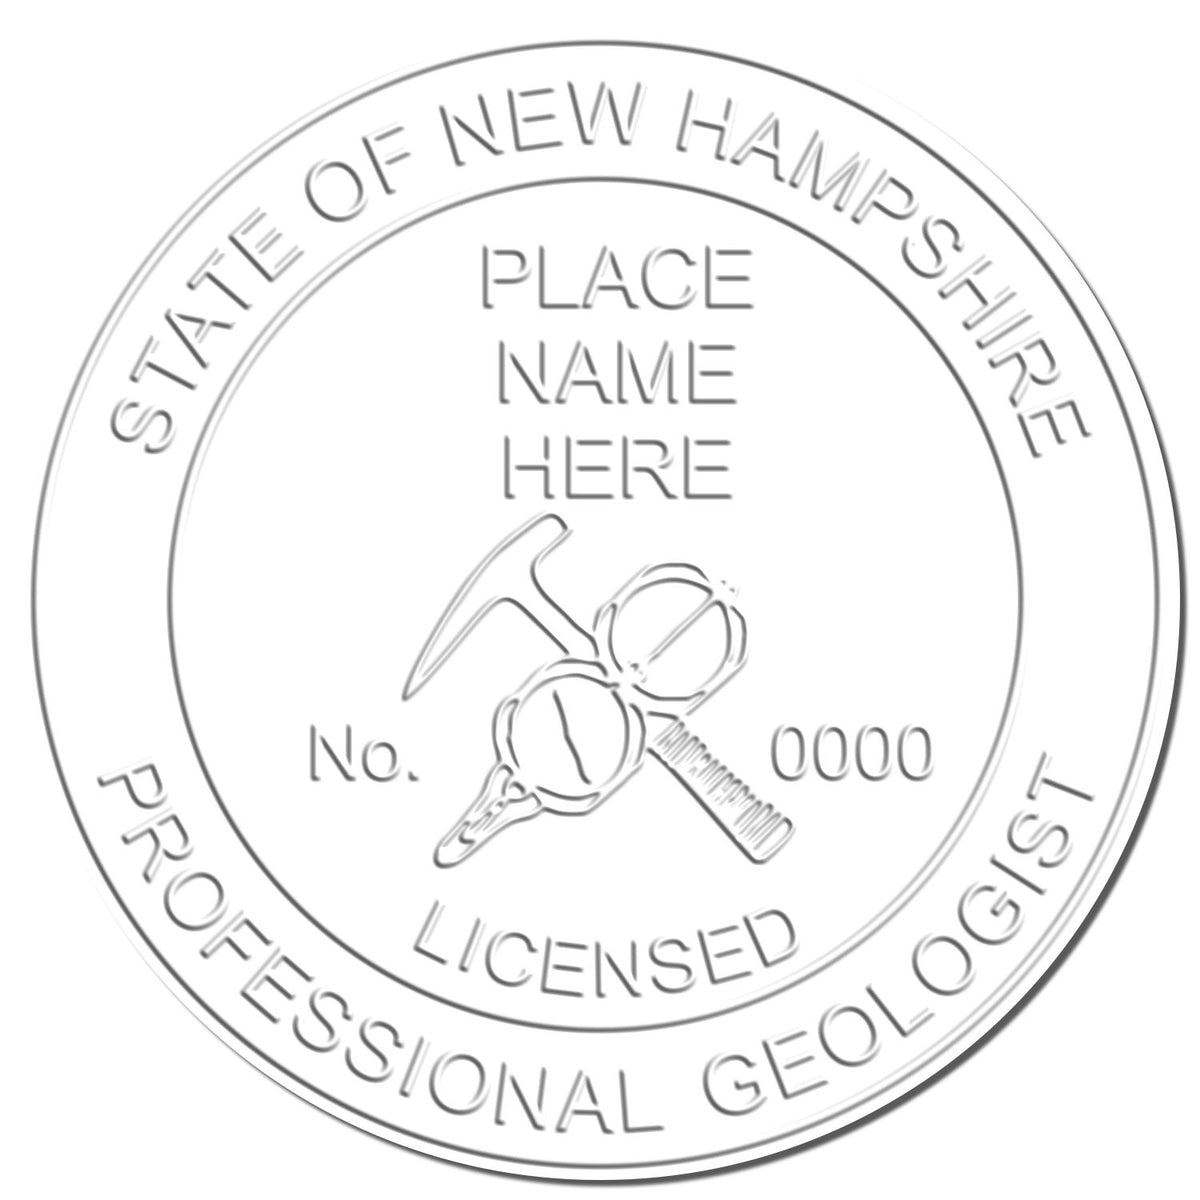 A photograph of the Hybrid New Hampshire Geologist Seal stamp impression reveals a vivid, professional image of the on paper.